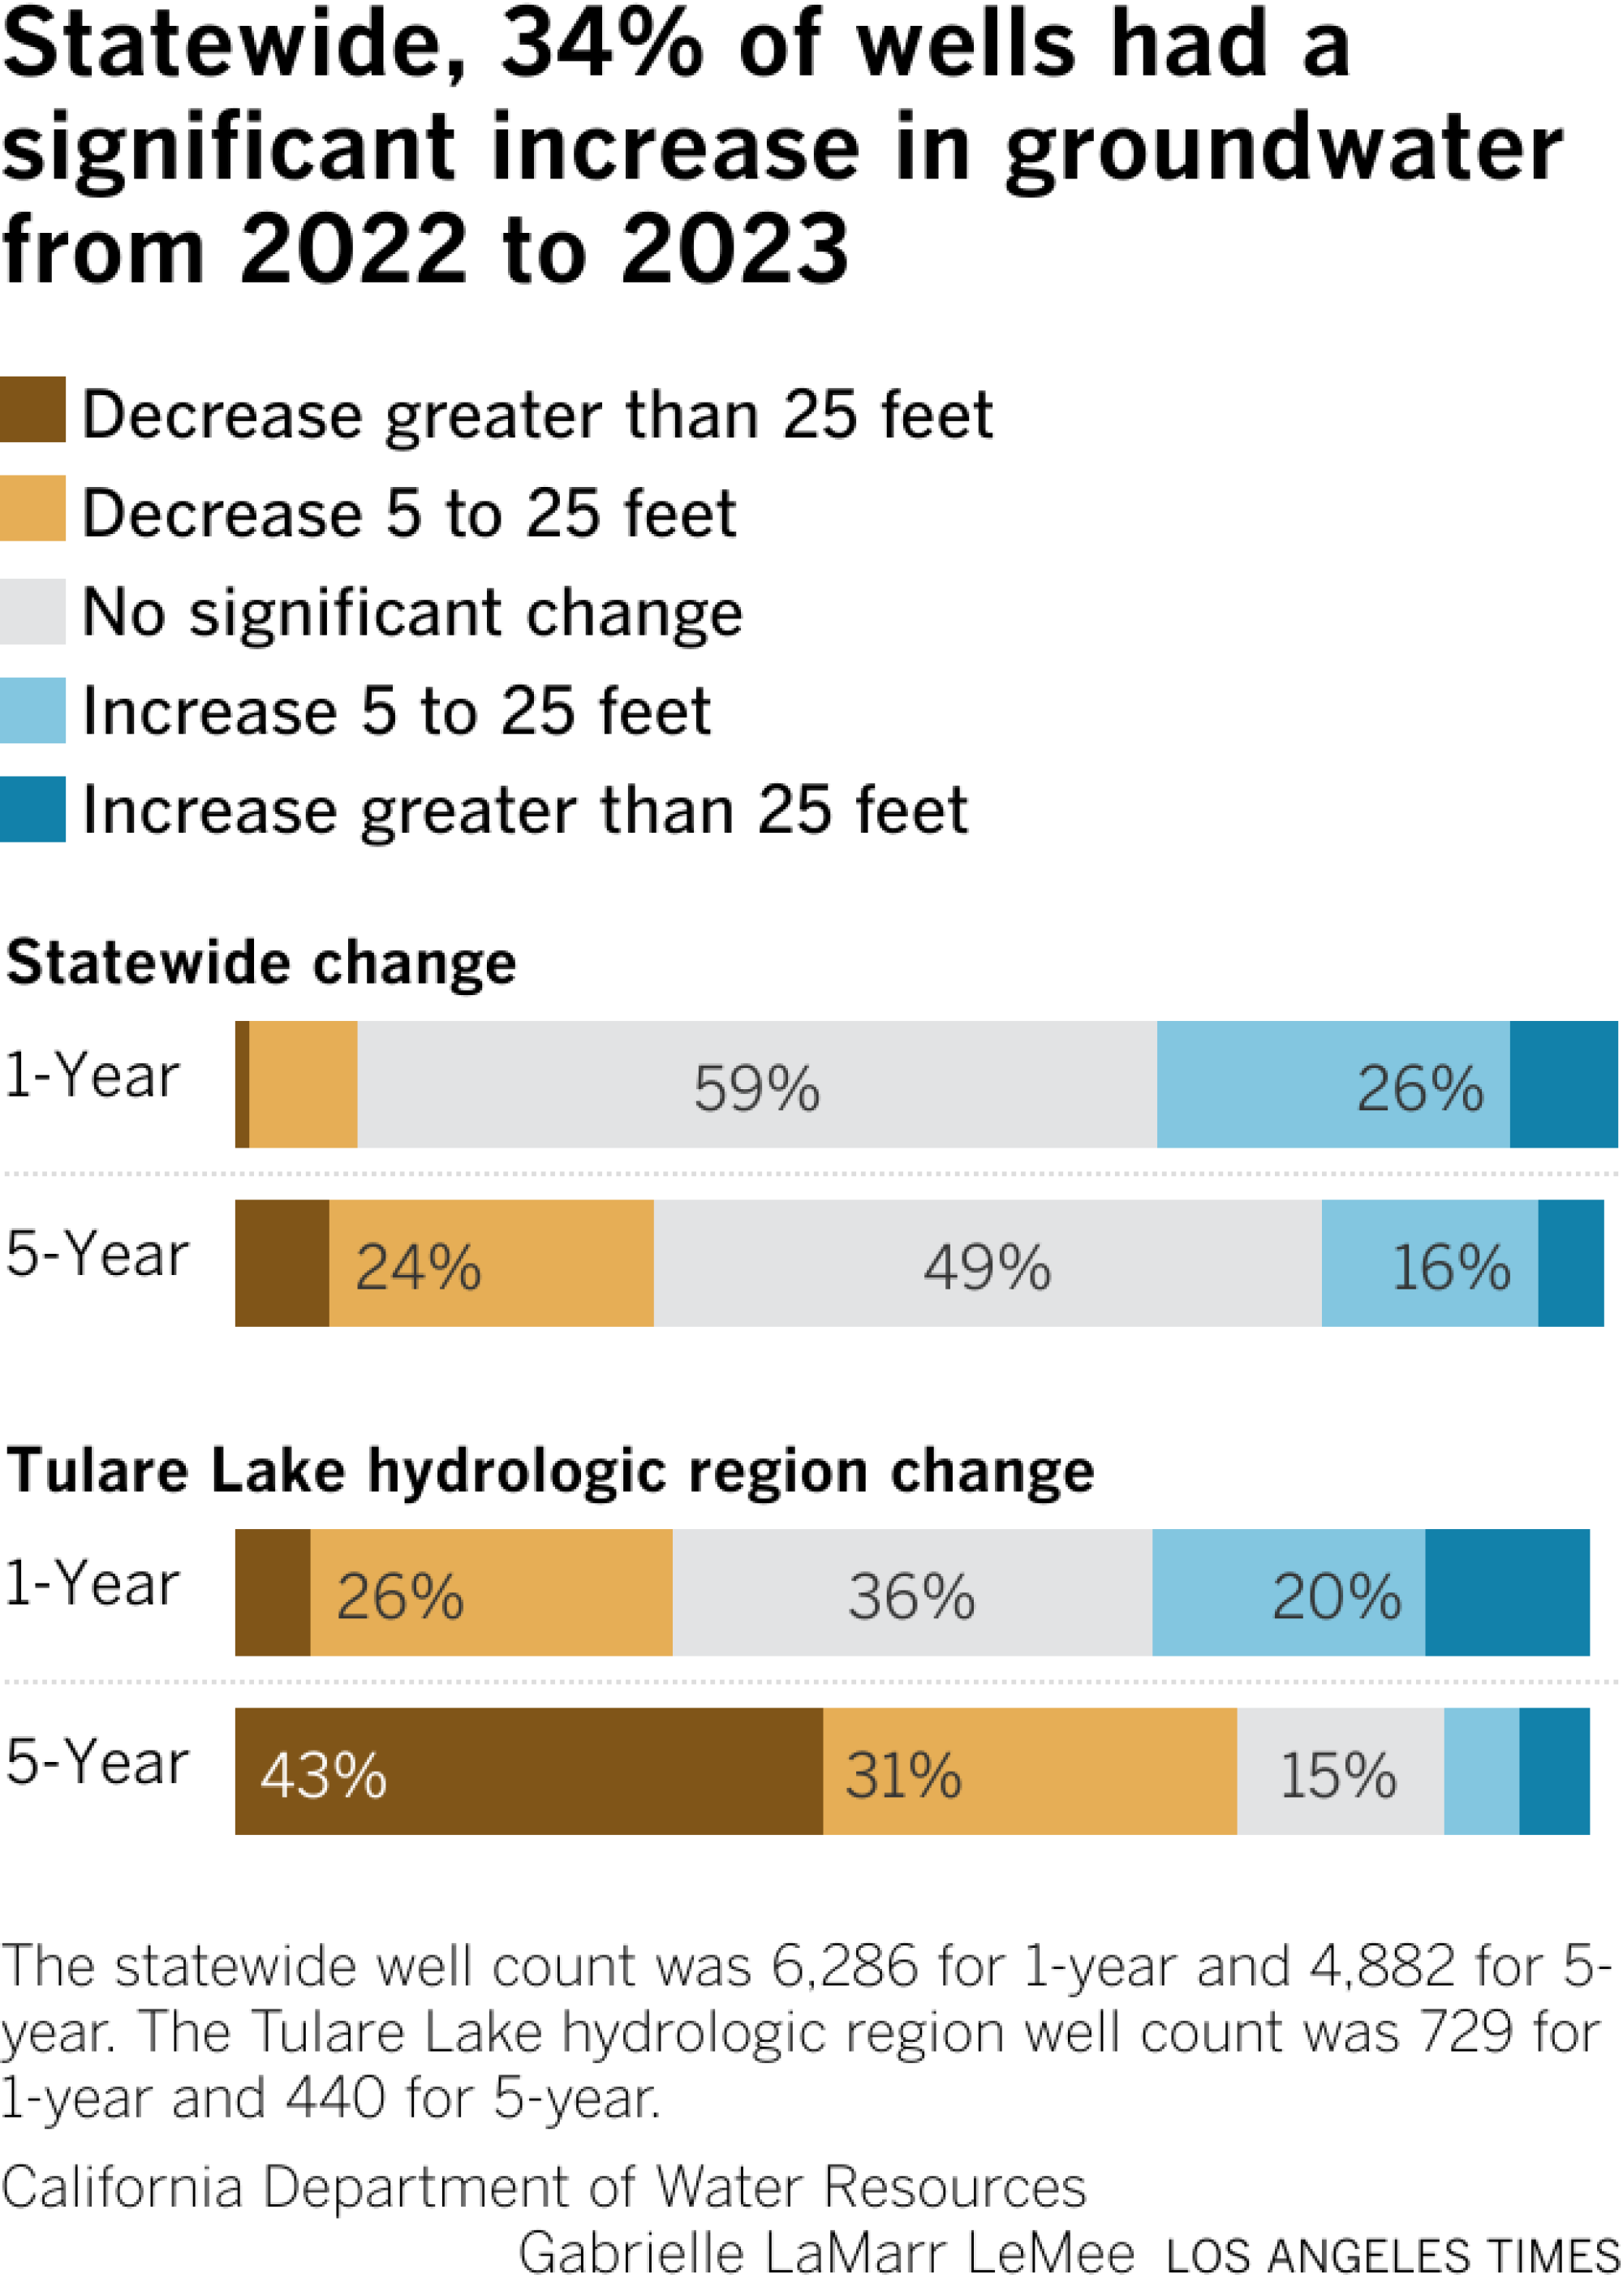 Statewide, 34% of wells had a significant increase in groundwater from 2022 to 2023